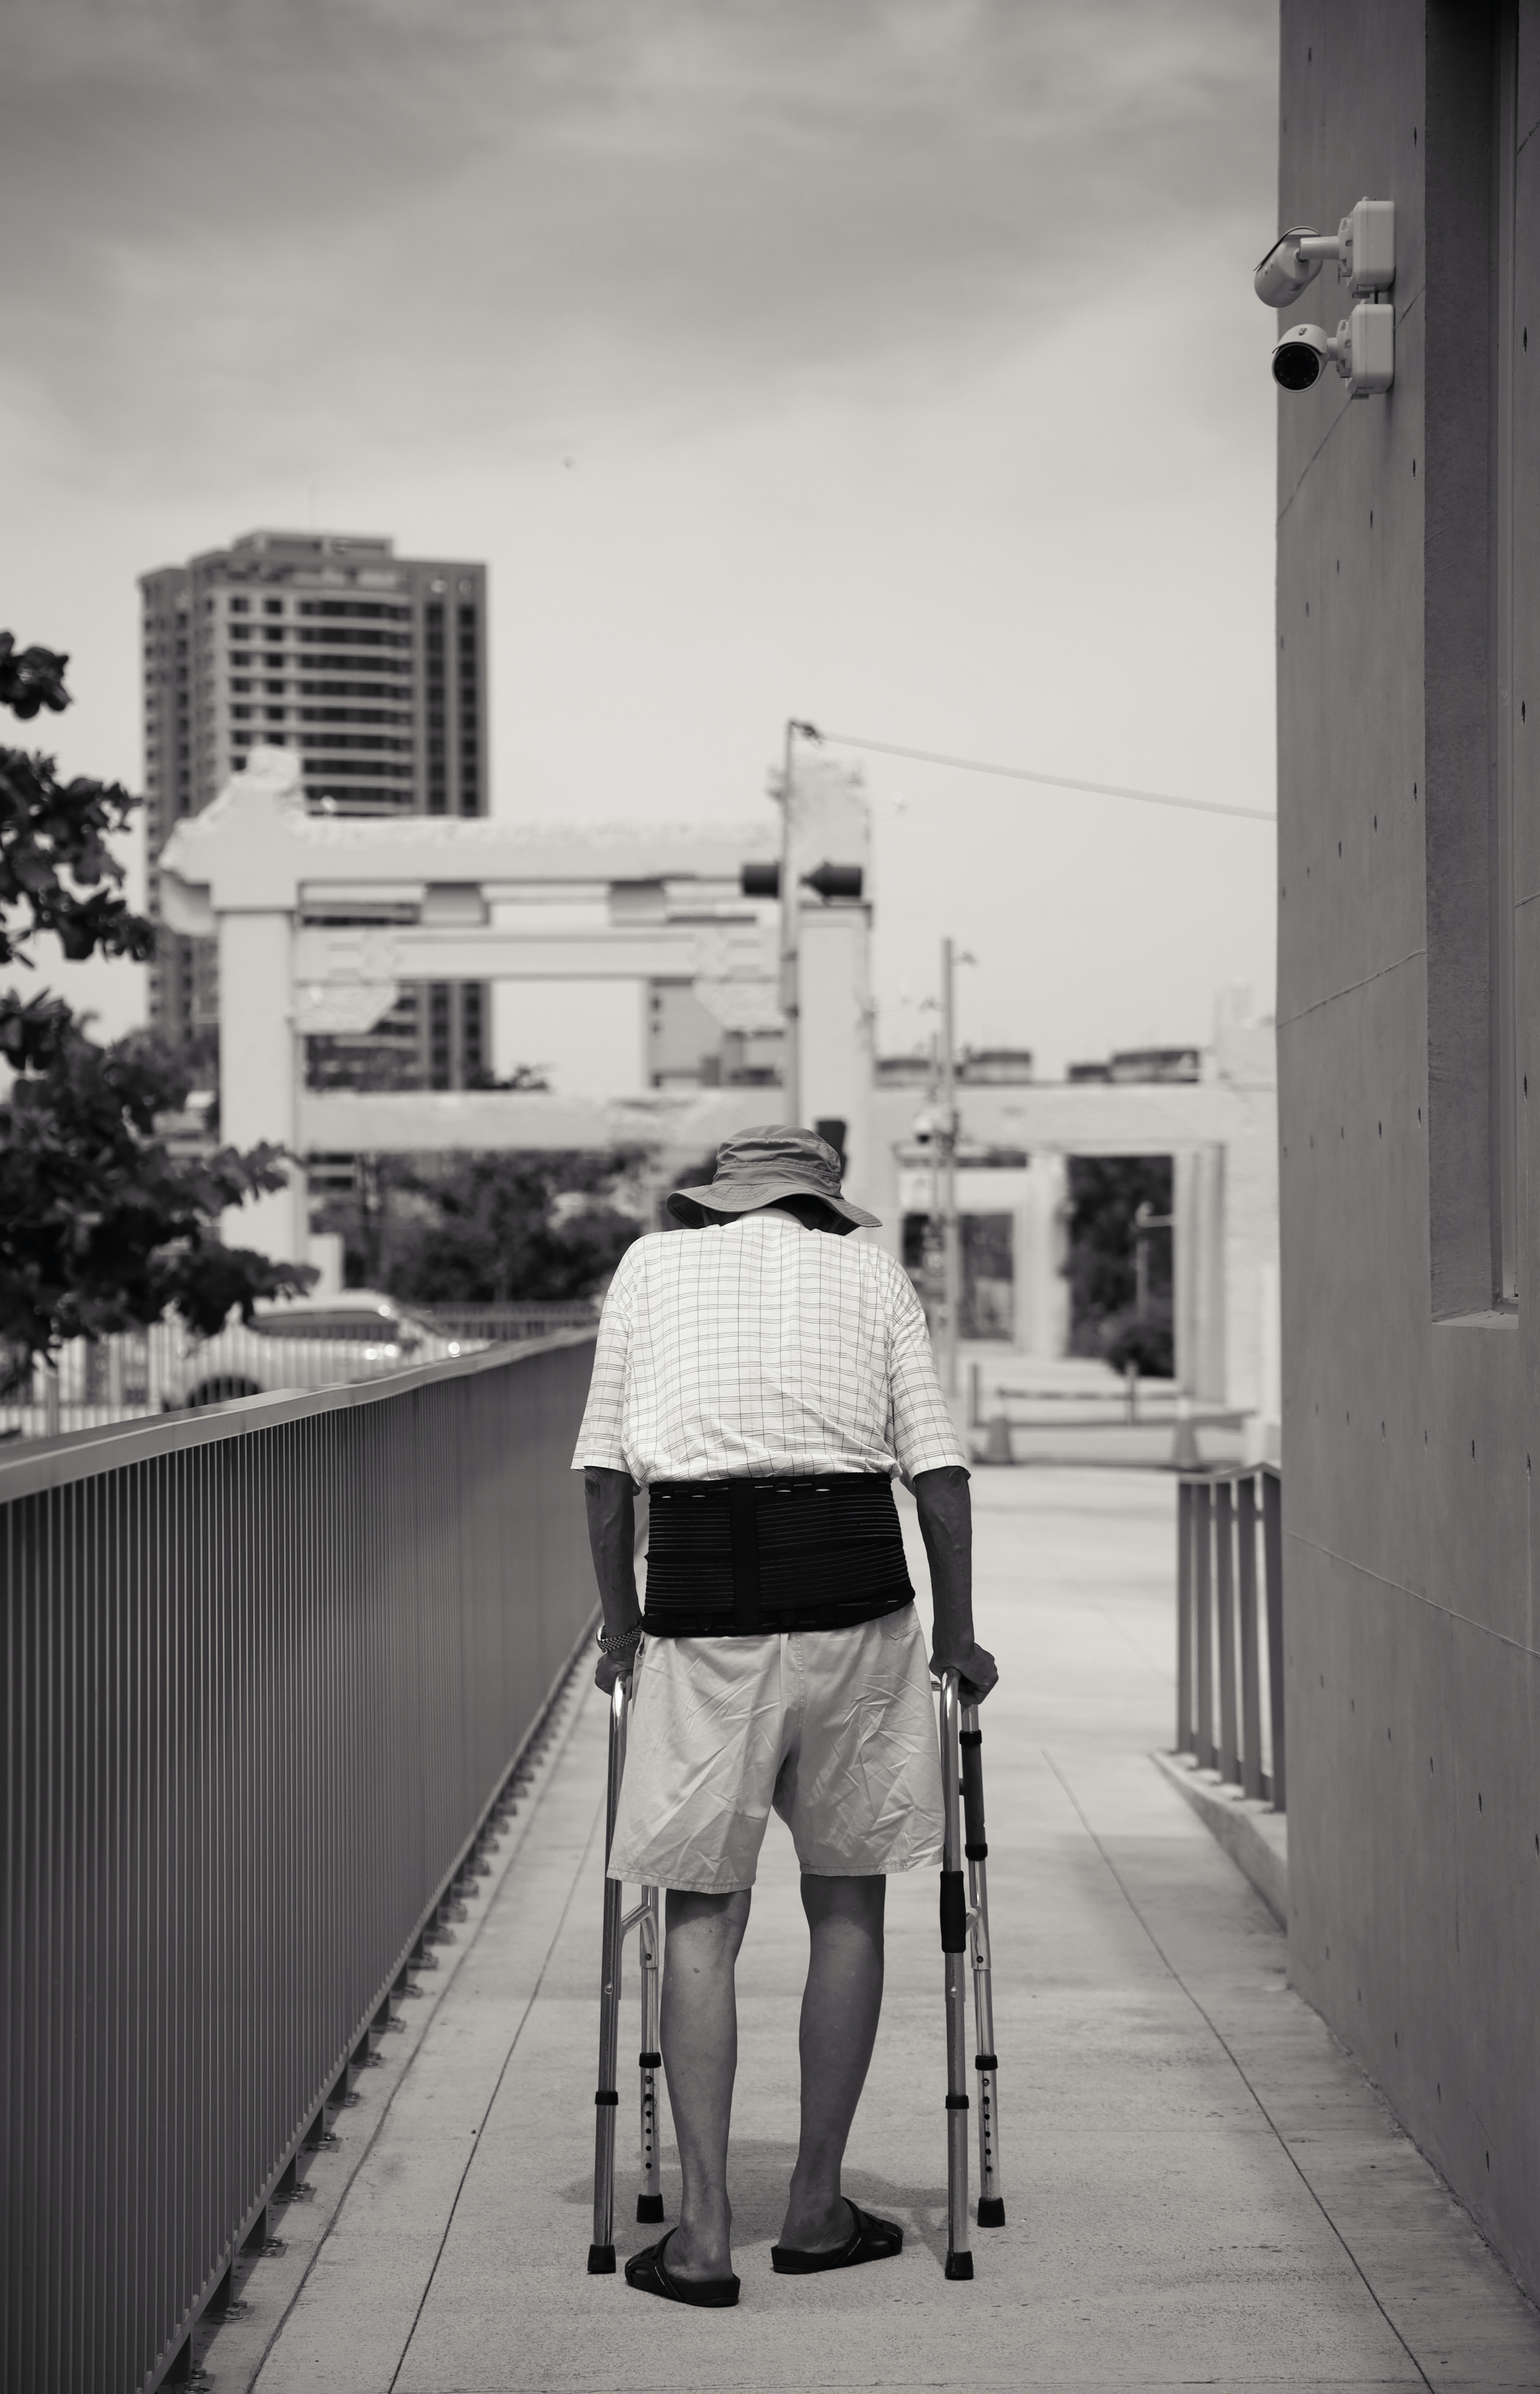 A black and white photograph of an eldery person using a walking frame